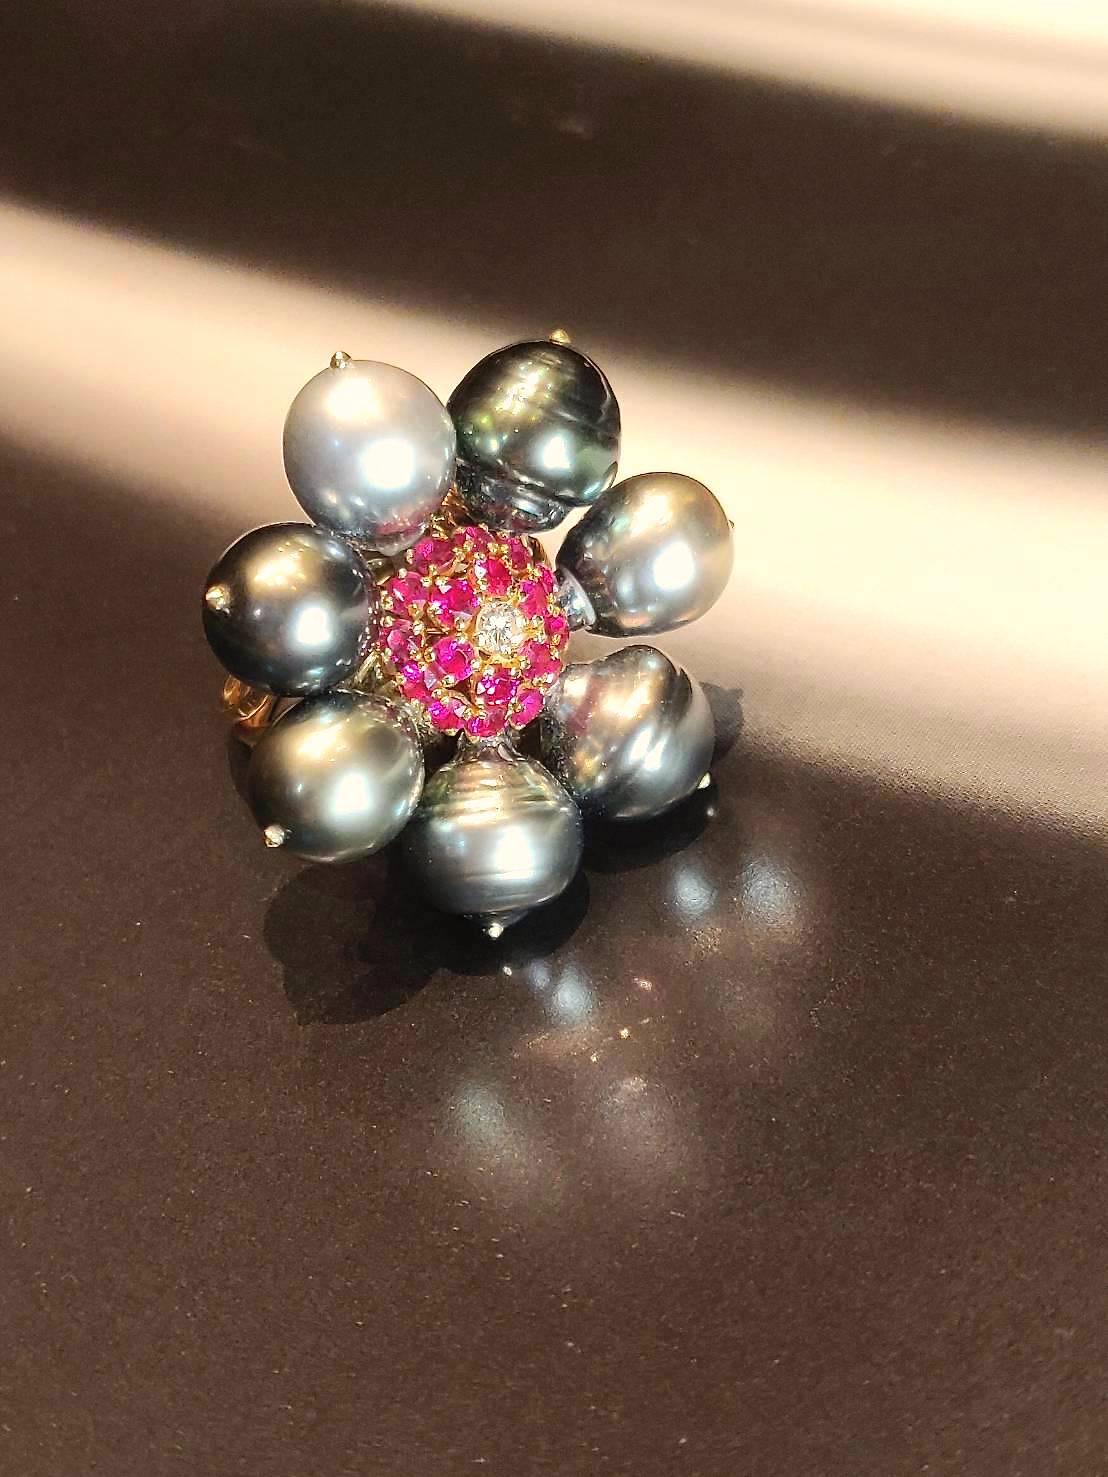 Flower Clustered Tahitian Pearl Ring in 18K Yellow Gold with Rubies and Diamonds. 

Gold: 18K Yellow Gold, 12.91 g
Tahitian Pearls: 7 pieces
Rubies: 1.26 ct
Diamond: 0.1 ct

Ring size: 57.5

Please let us know should you wish to have the ring